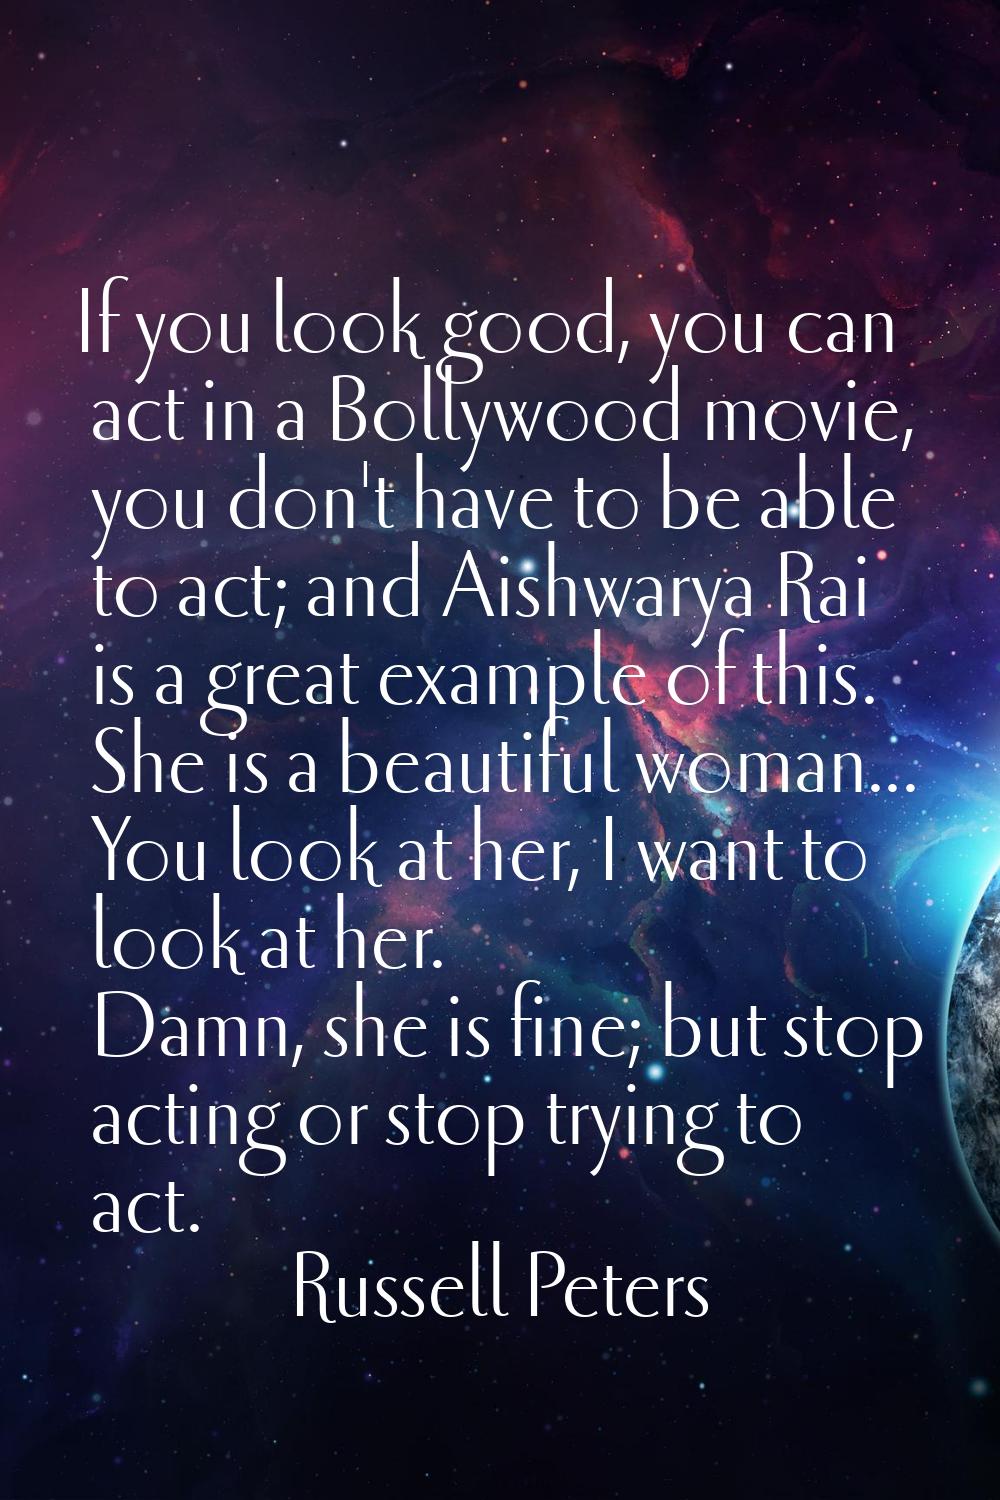 If you look good, you can act in a Bollywood movie, you don't have to be able to act; and Aishwarya